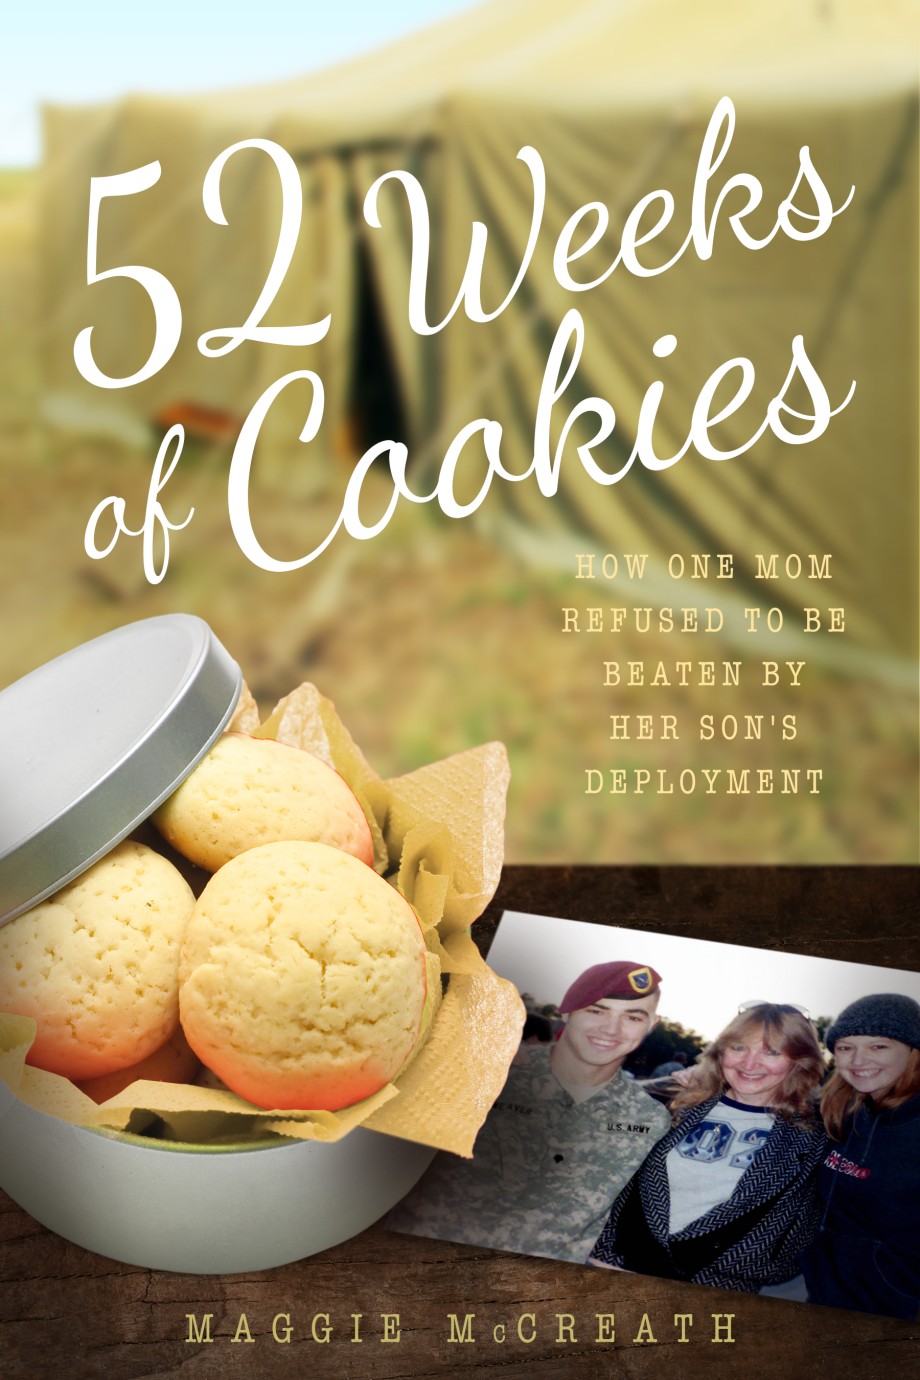 52 Weeks of Cookies How One Mom Refused to Be Beaten by Her Son's Deployment